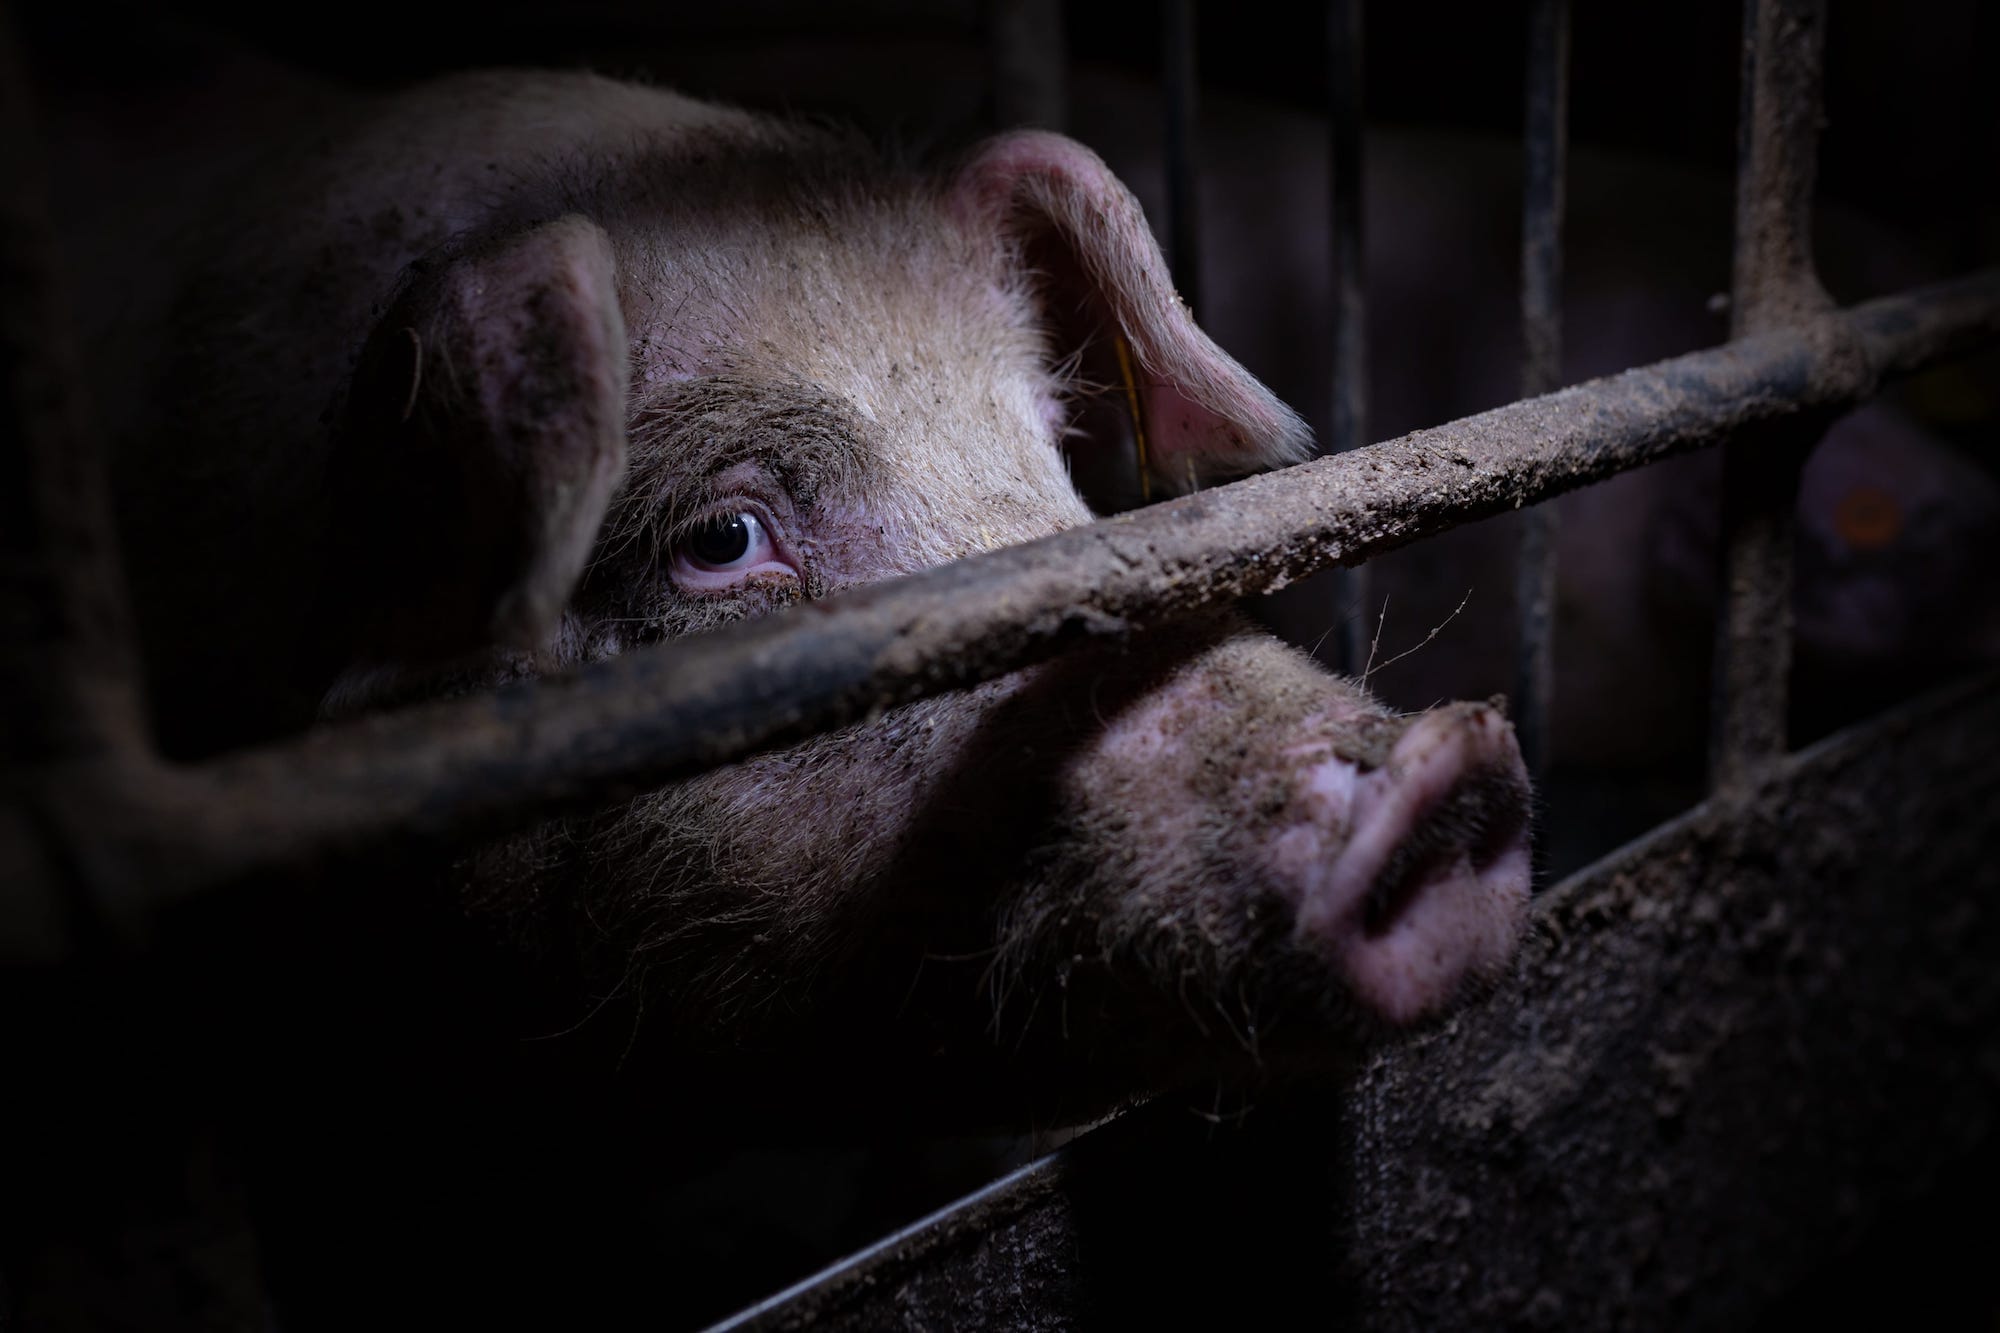 Image shows pig in factory farm